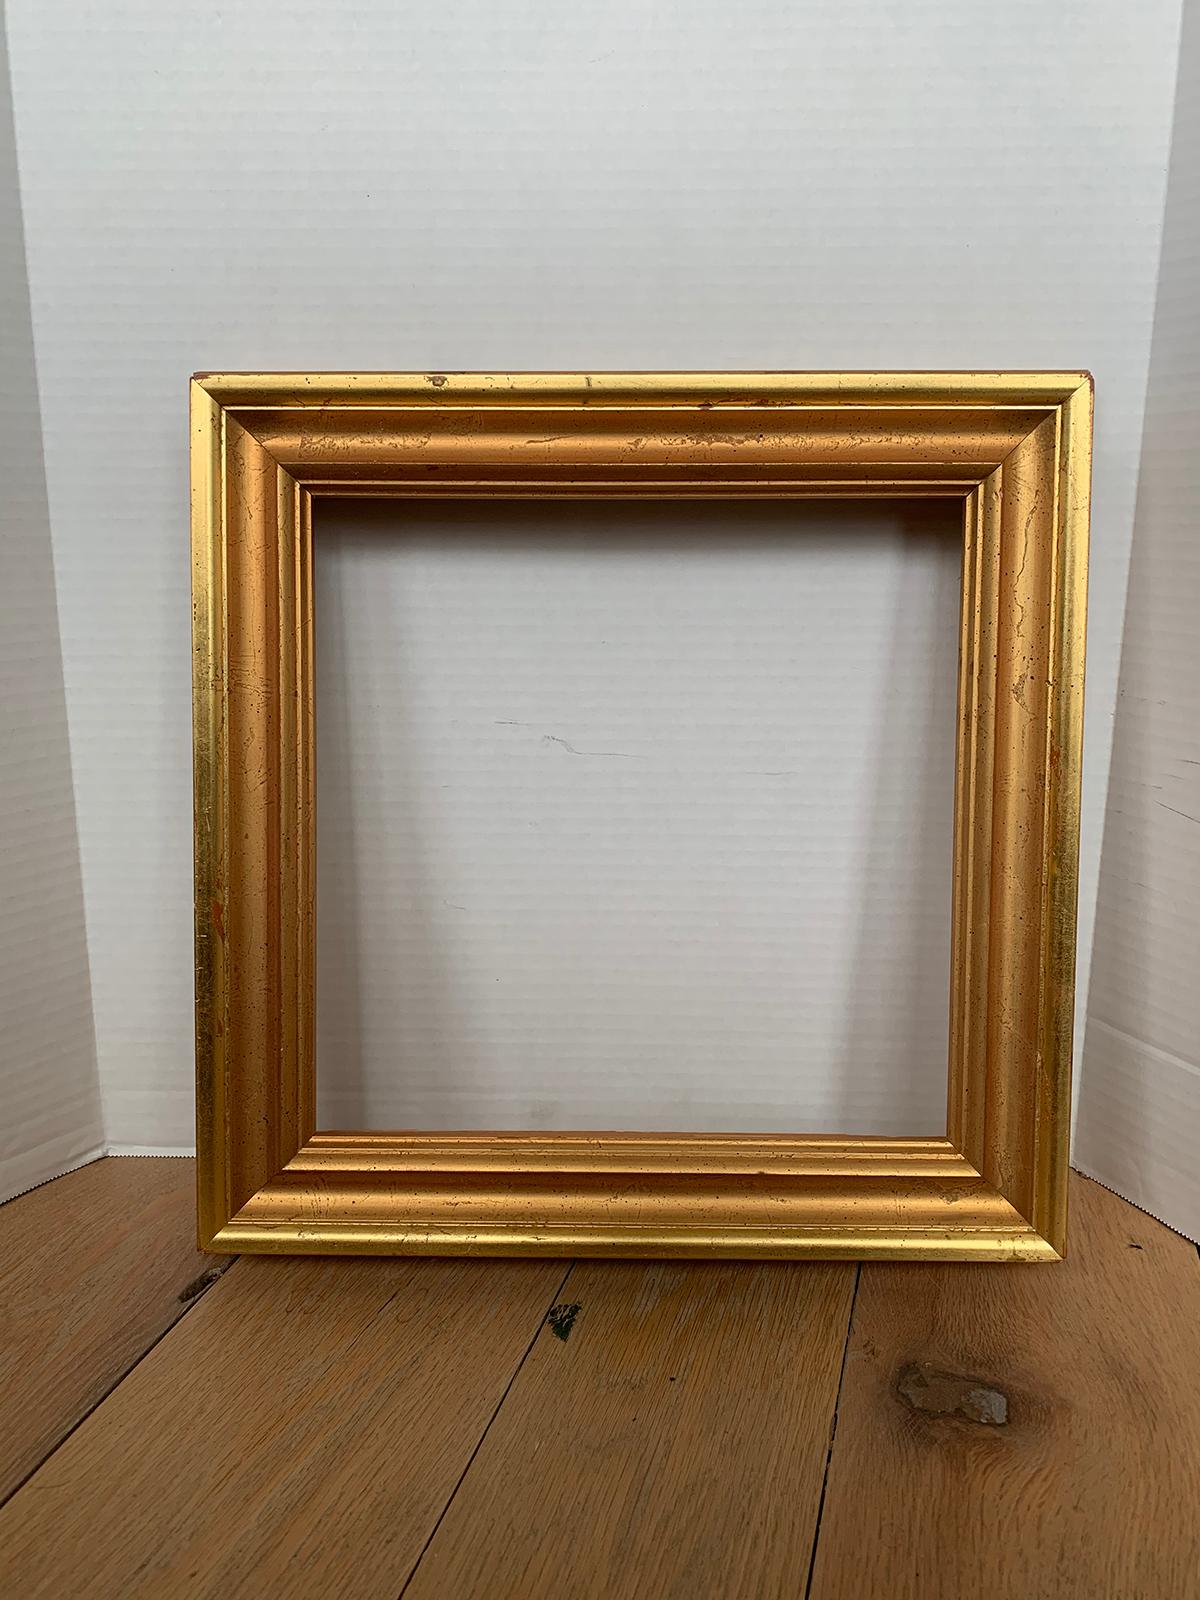 20th century square giltwood frame
Measures: Fits 11.75